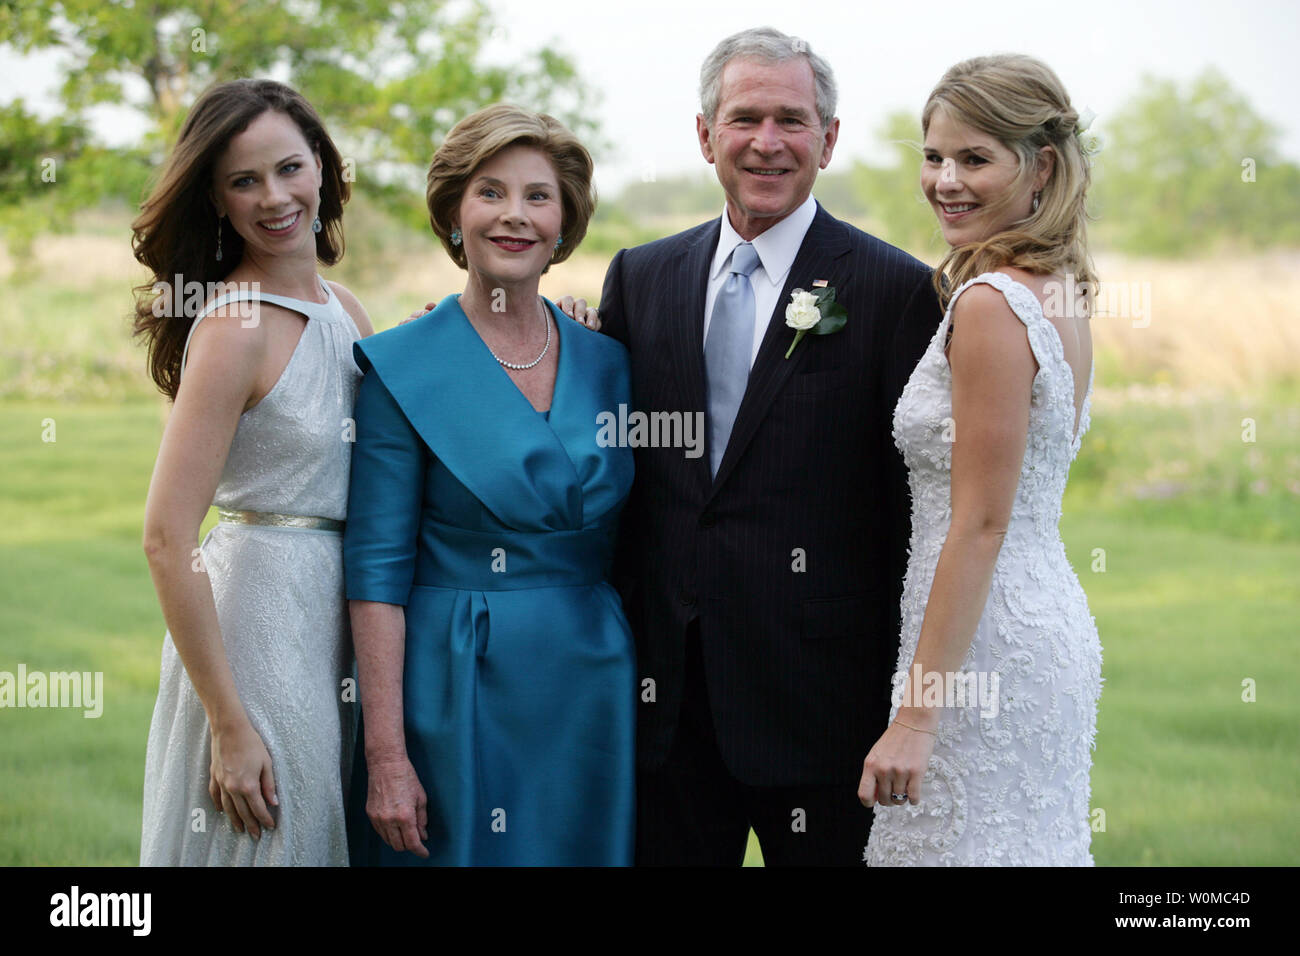 President George W. Bush and Mrs. Laura Bush pose with daughters Jenna and Barbara on Saturday, May 10, 2008 at Prairie Chapel Ranch in Crawford, Texas, prior to the wedding of Jenna and Henry Hager.   Photo released by White House on May 11th.   (UPI Photo/White House/Shealah Craighead) Stock Photo